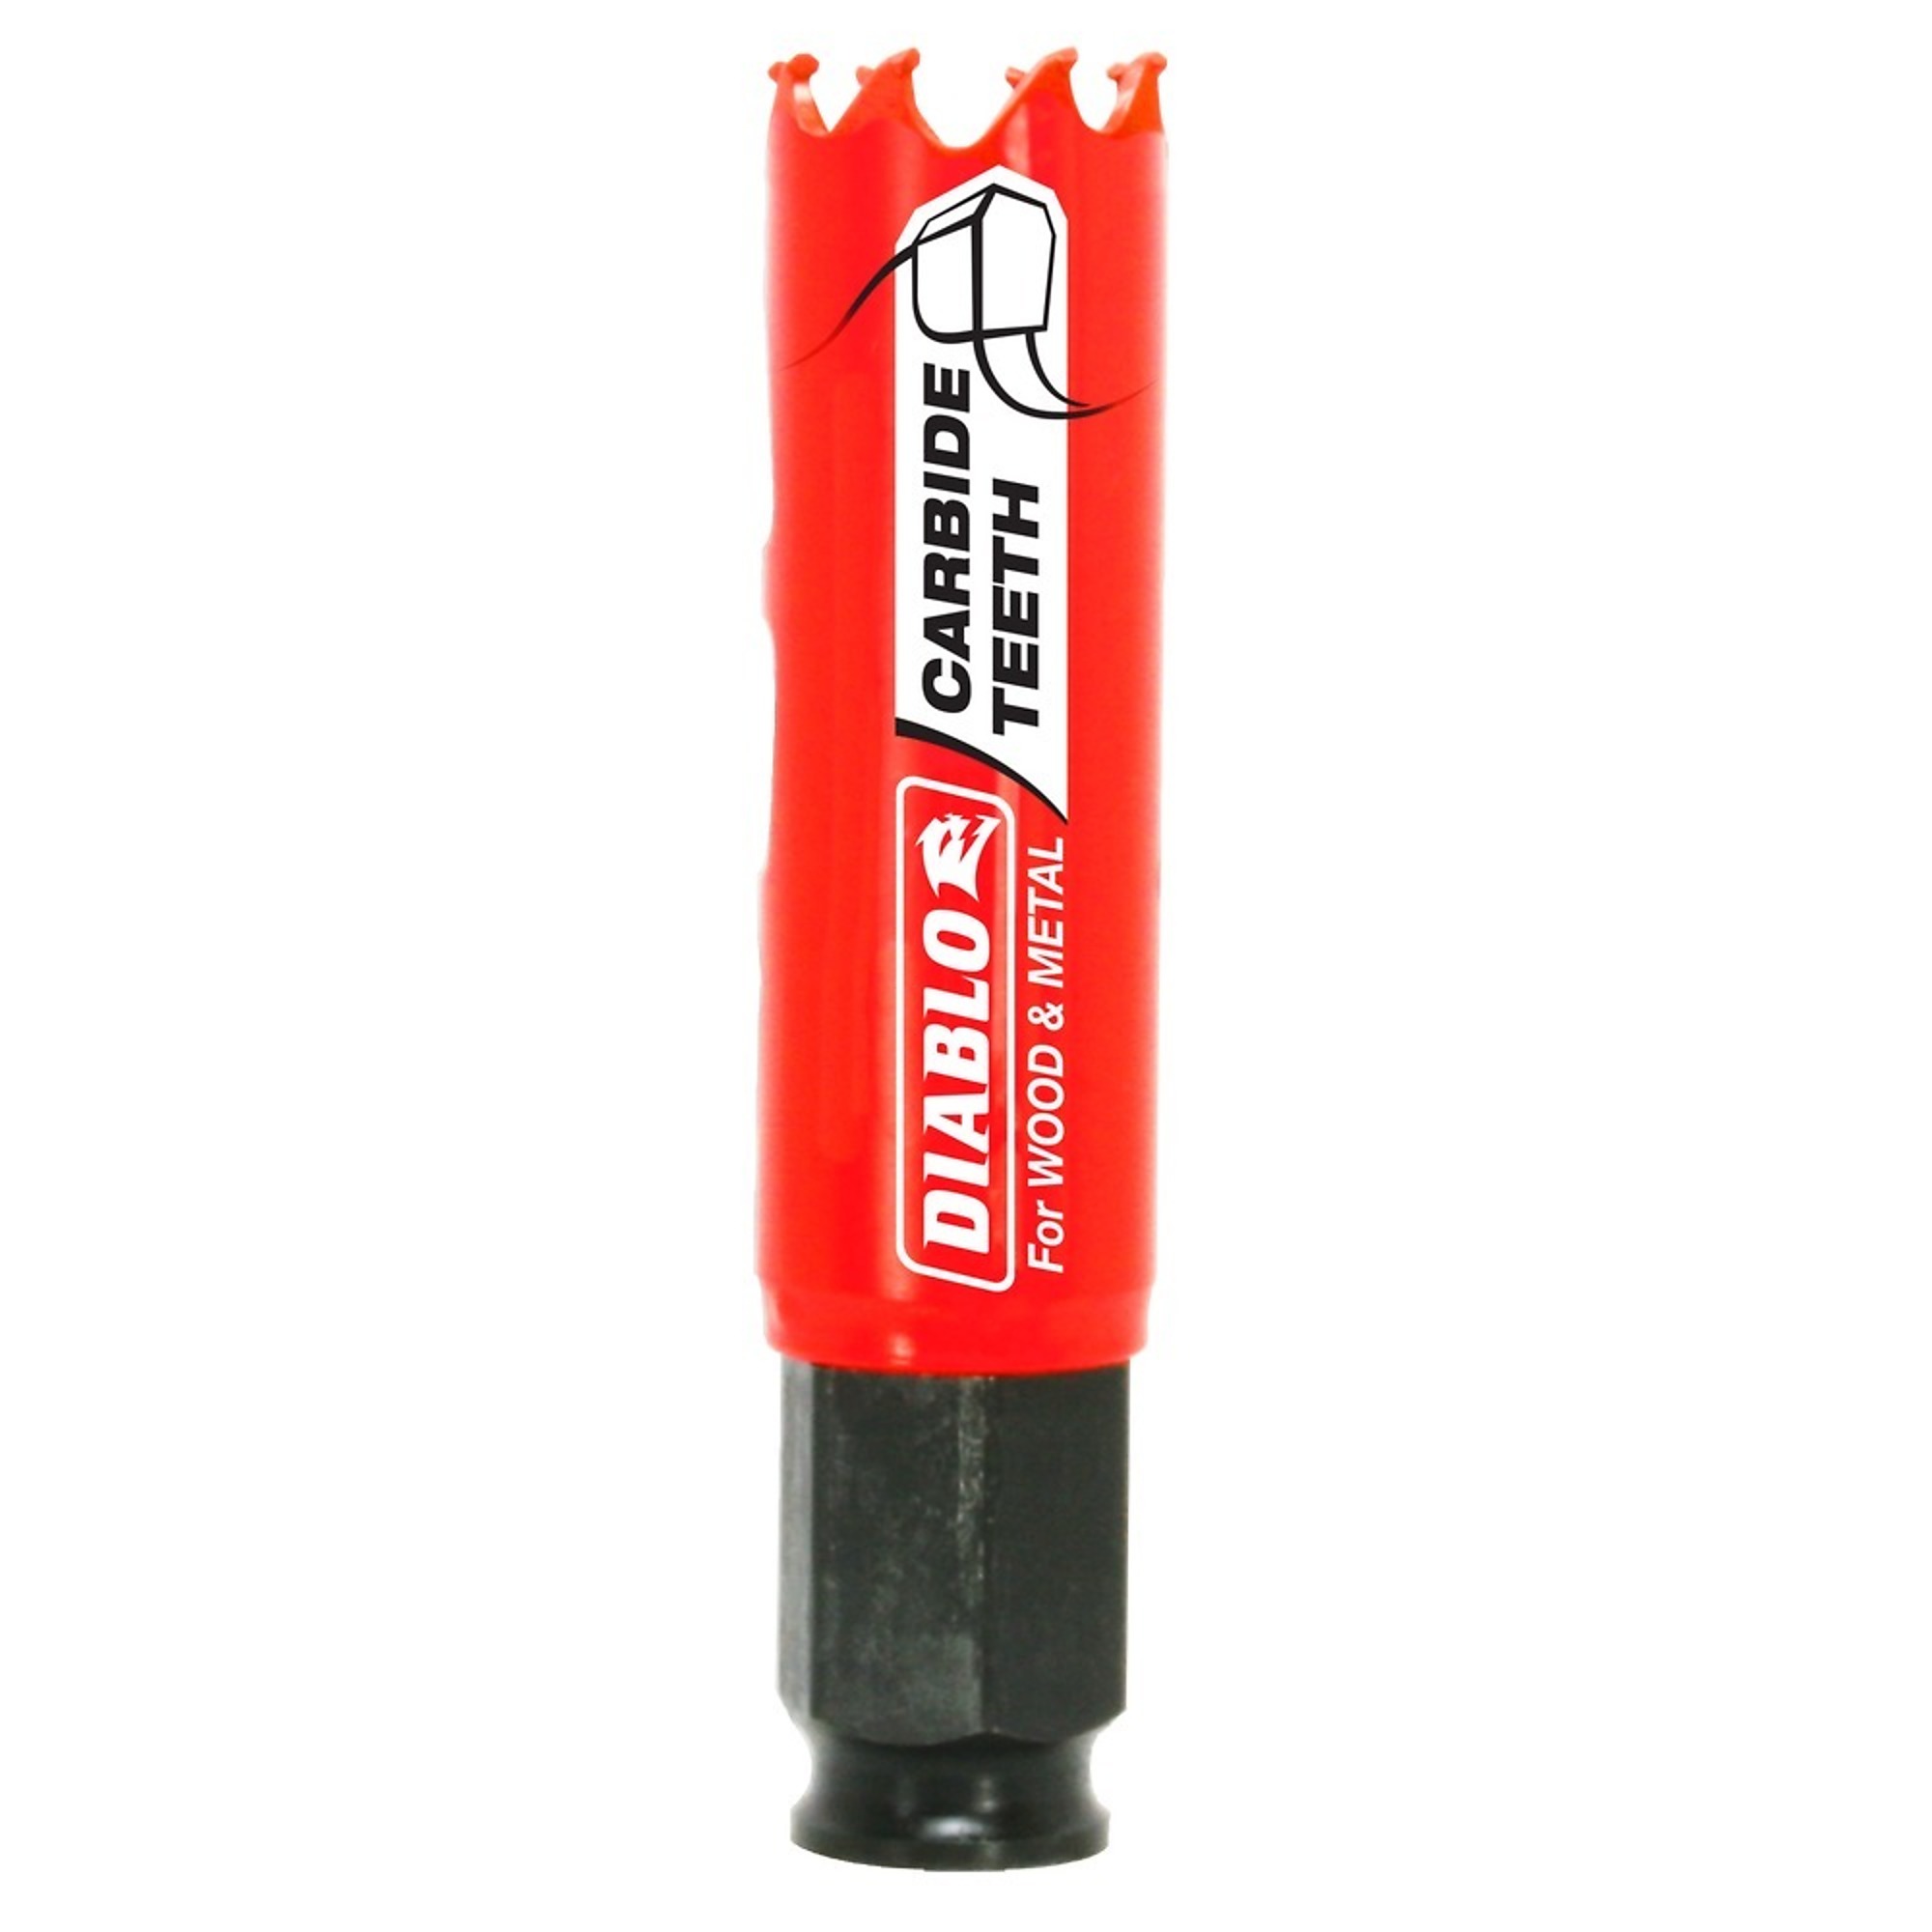 Diablo Tools, 7/8 General Purpose Carbide Holesaw, Included (qty.) 1, Model DHS0875CT